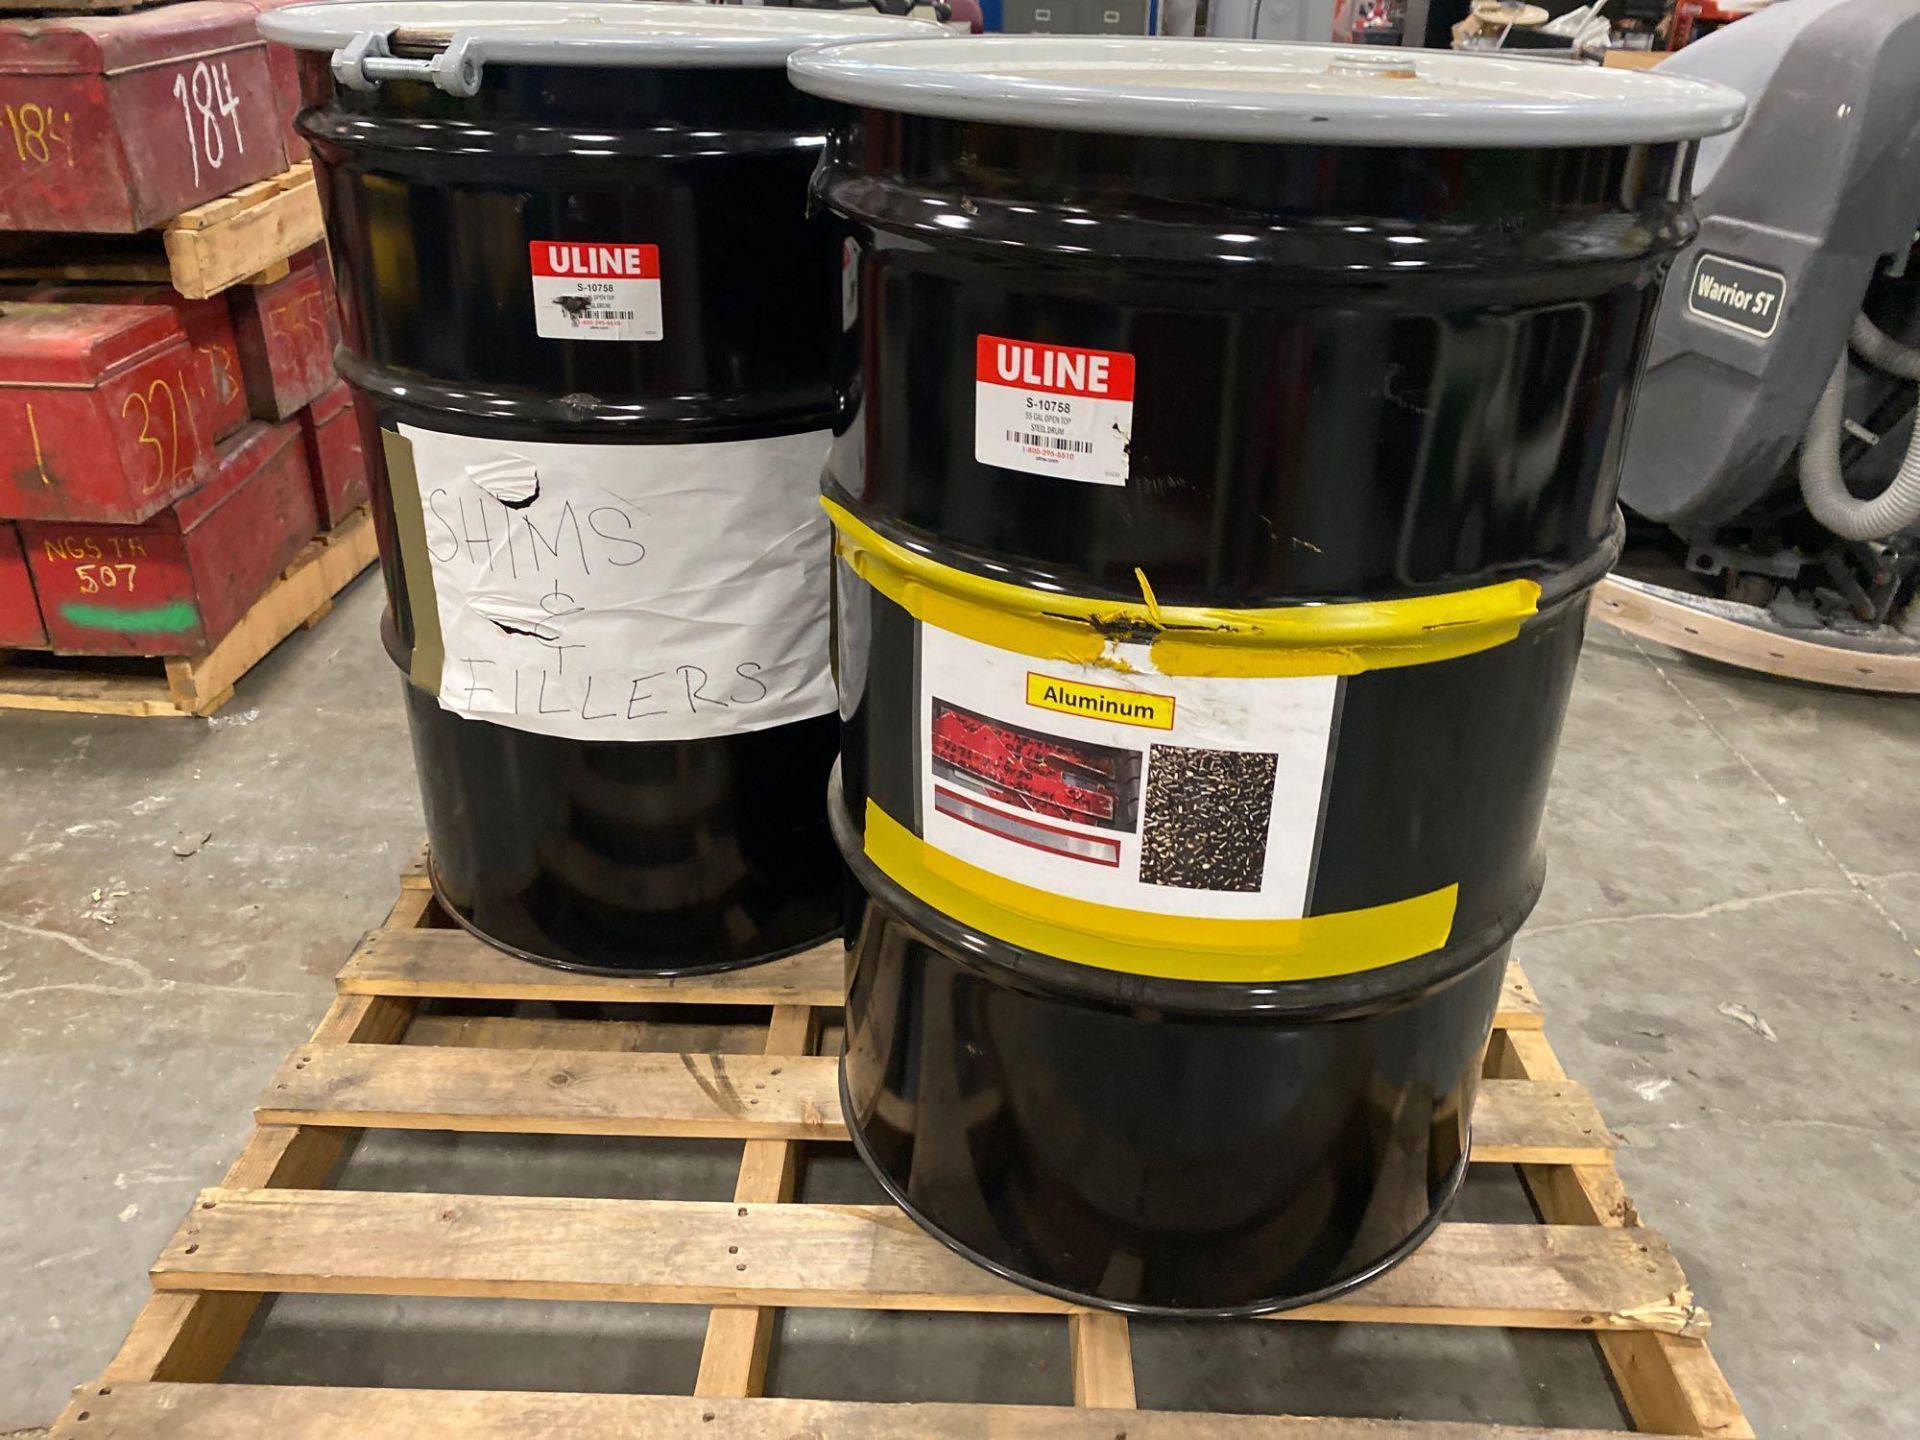 DRUMS FULL OF AIRCRAFT ALUMINUM SHIMS, FILLERS AND HARDWARE